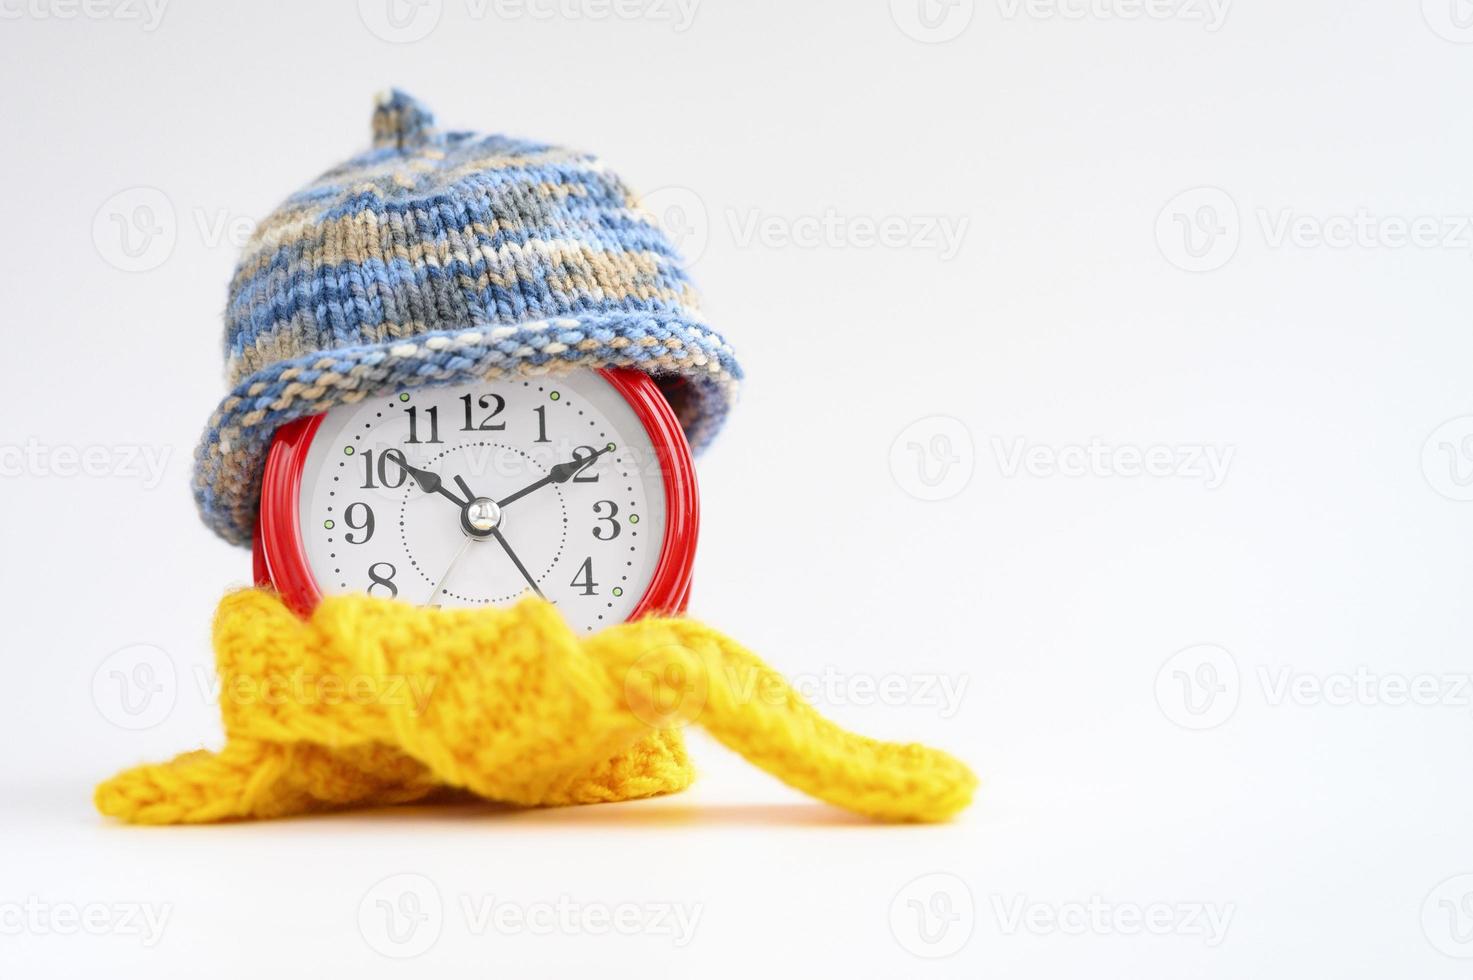 Red round alarm clock in knitted wool blue hat and yellow scarf on a blue background. wintertime concept. winter season. cozy and warm. analog time 10 10. space for text. banner photo